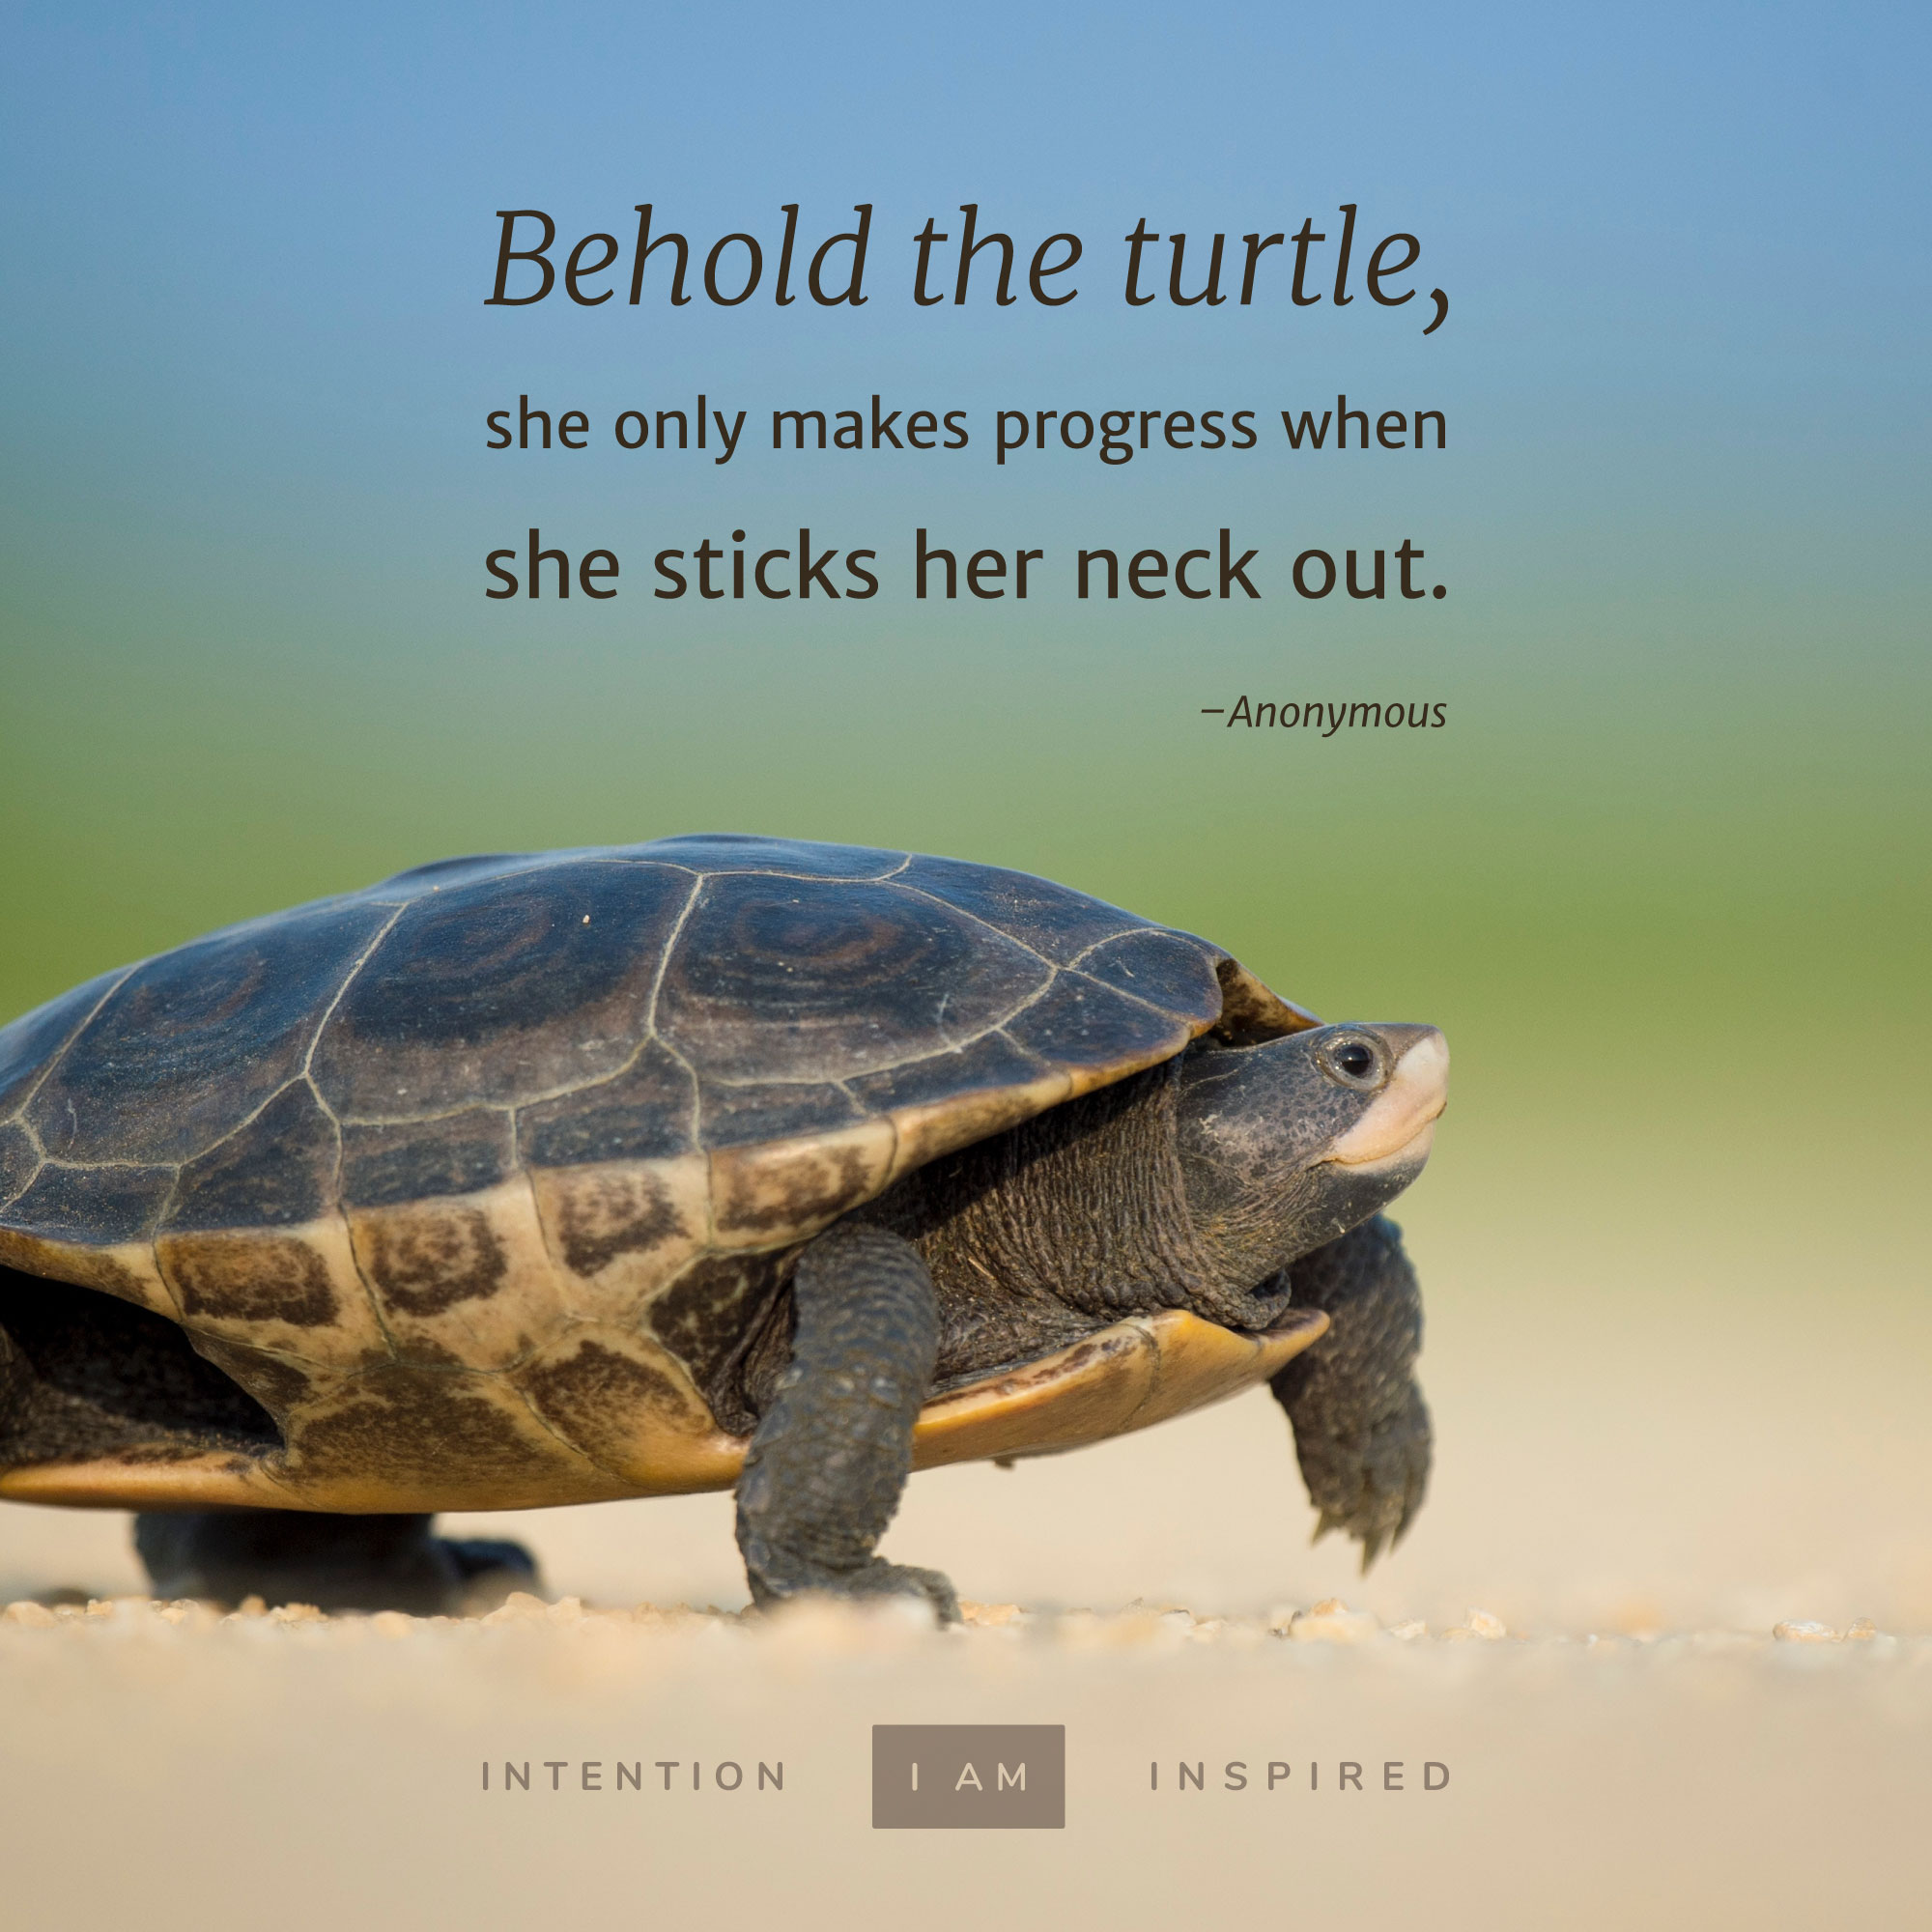 Behold the turtle, she only makes progress when she sticks her neck out.